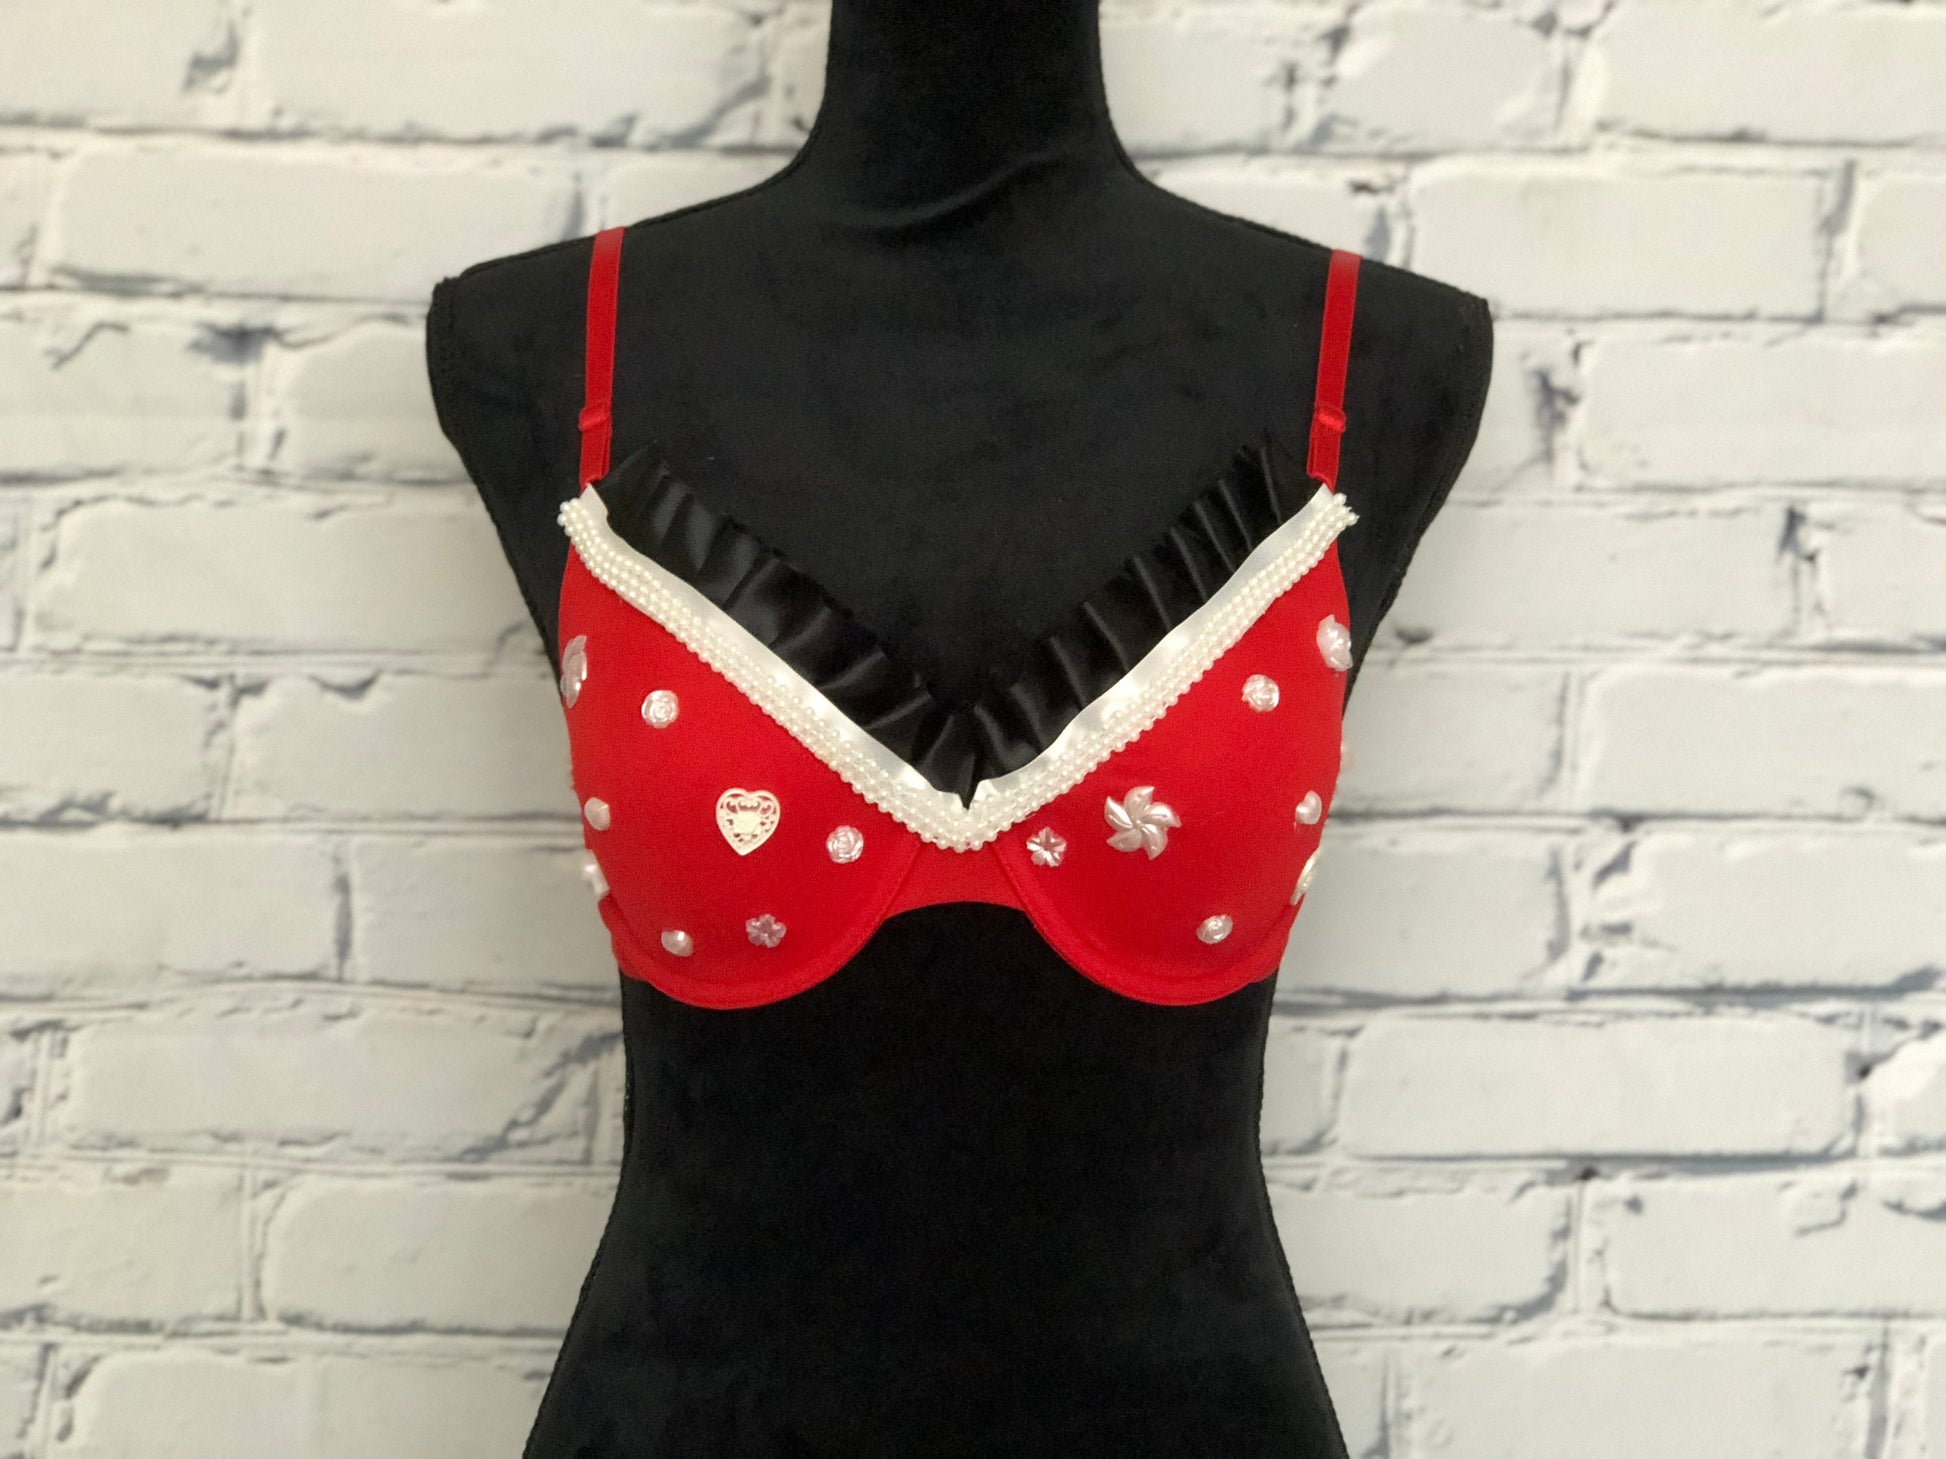 Minnie Mouse Inspired Rave Bra - Perfect for any Rave Outfit, edm Bra,  Exotic Dance Bra, edm Outfit, Rave Wear, EDC Bra, or EDC Costume